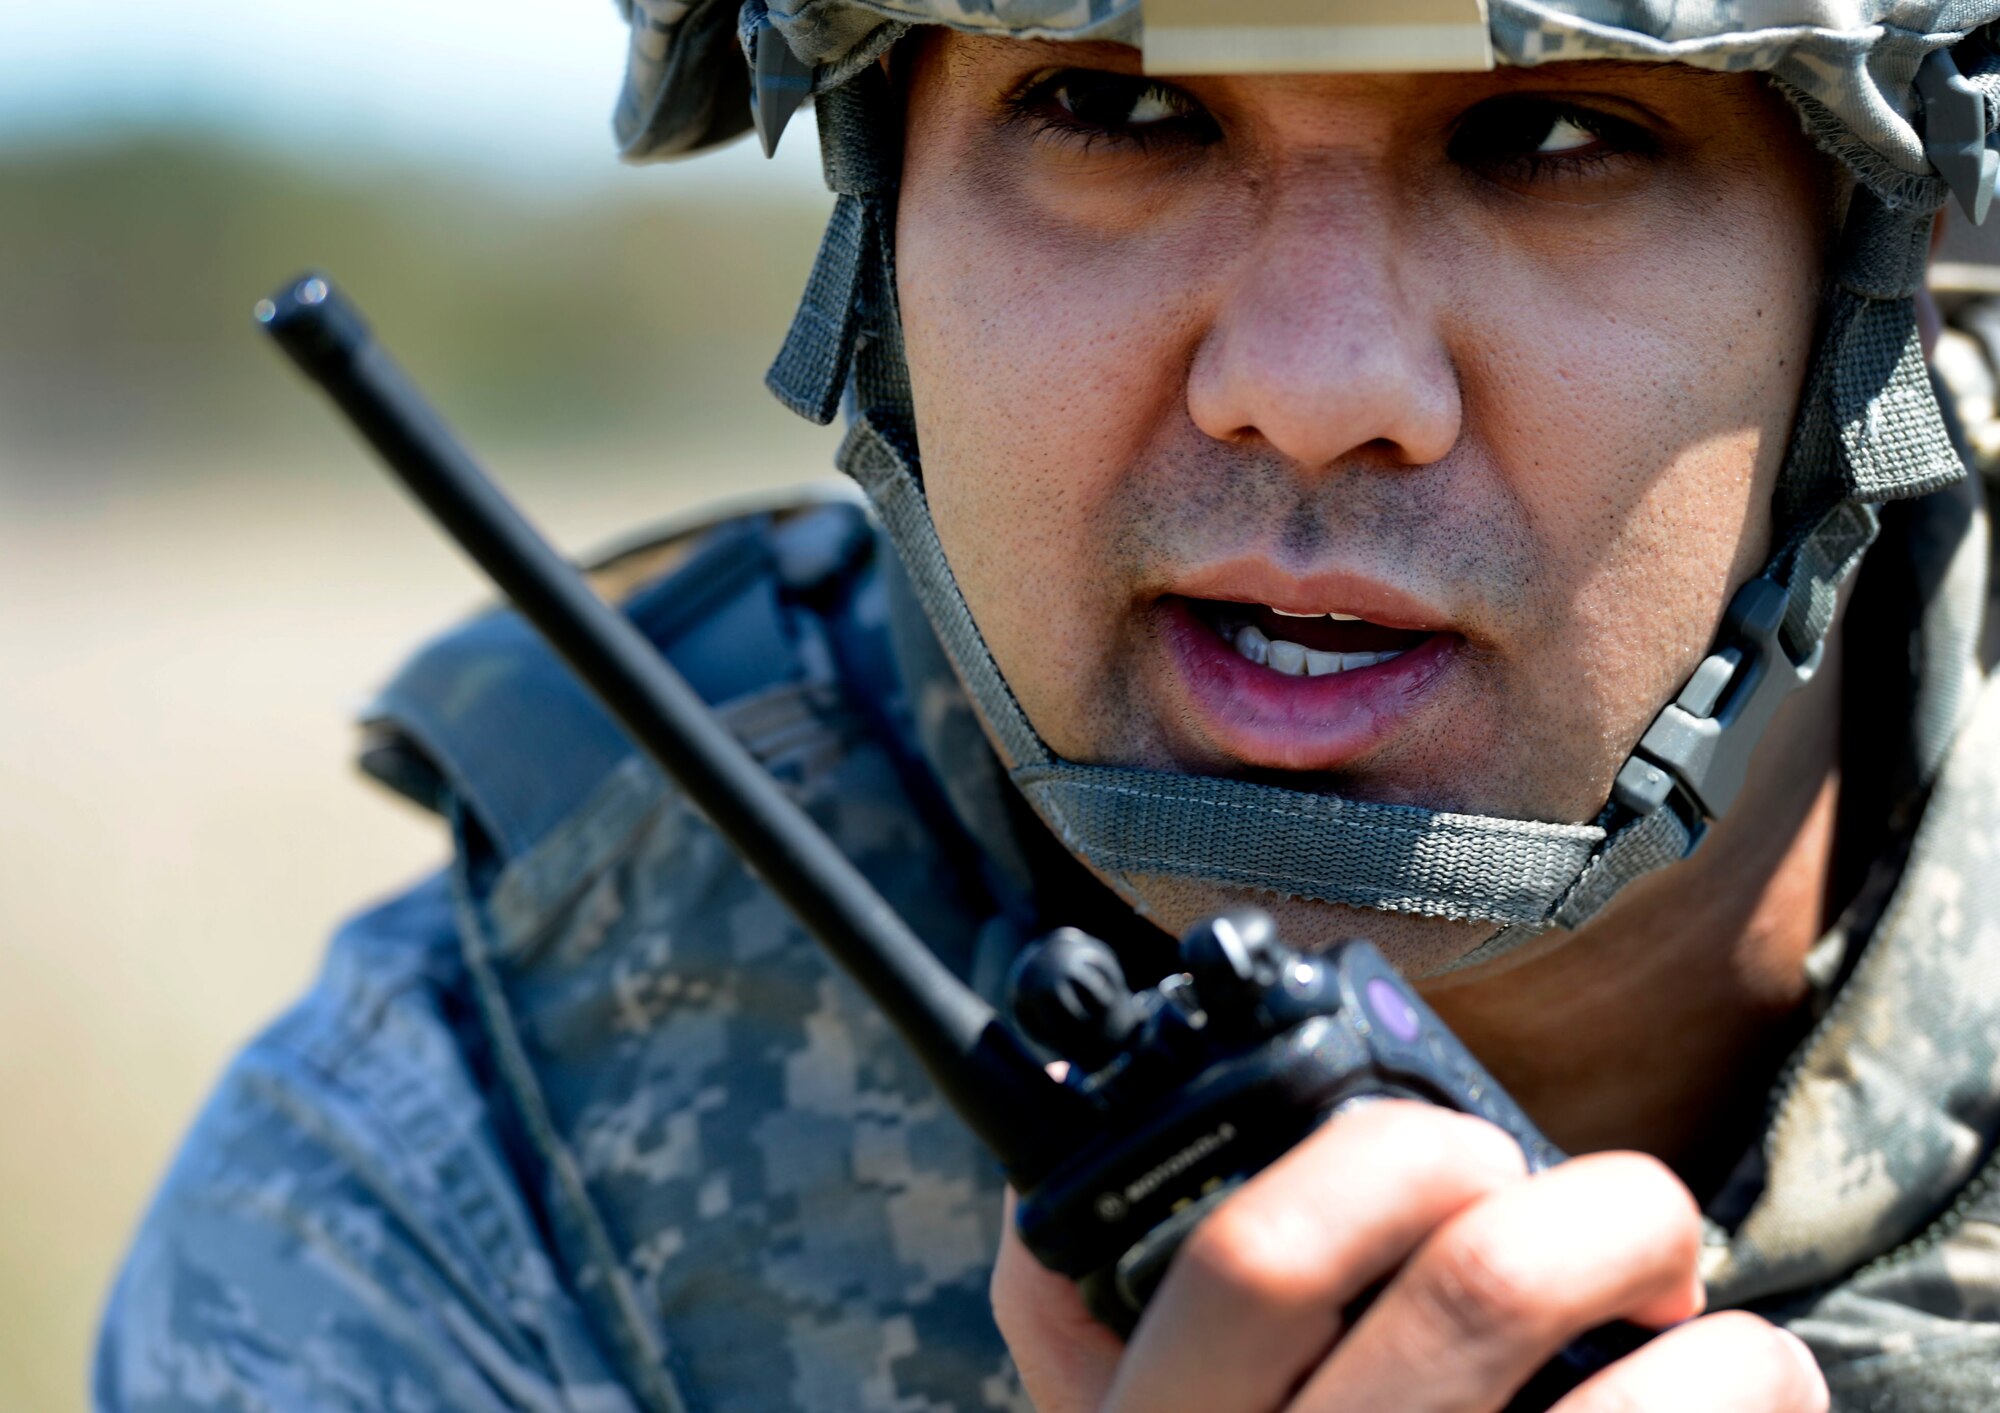 U.S Air Force Airman Julian Arnold, 20th Security Forces Squadron base defense operations center controller, speaks into his radio during operational readiness exercise Weasel Victory 16-08 at Shaw Air Force Base, S.C., March 22, 2016. ORE’s are conducted to properly assess the combat capabilities of the 20th Fighter Wing.  (U.S. Air Force photo by Senior Airman Michael Cossaboom)